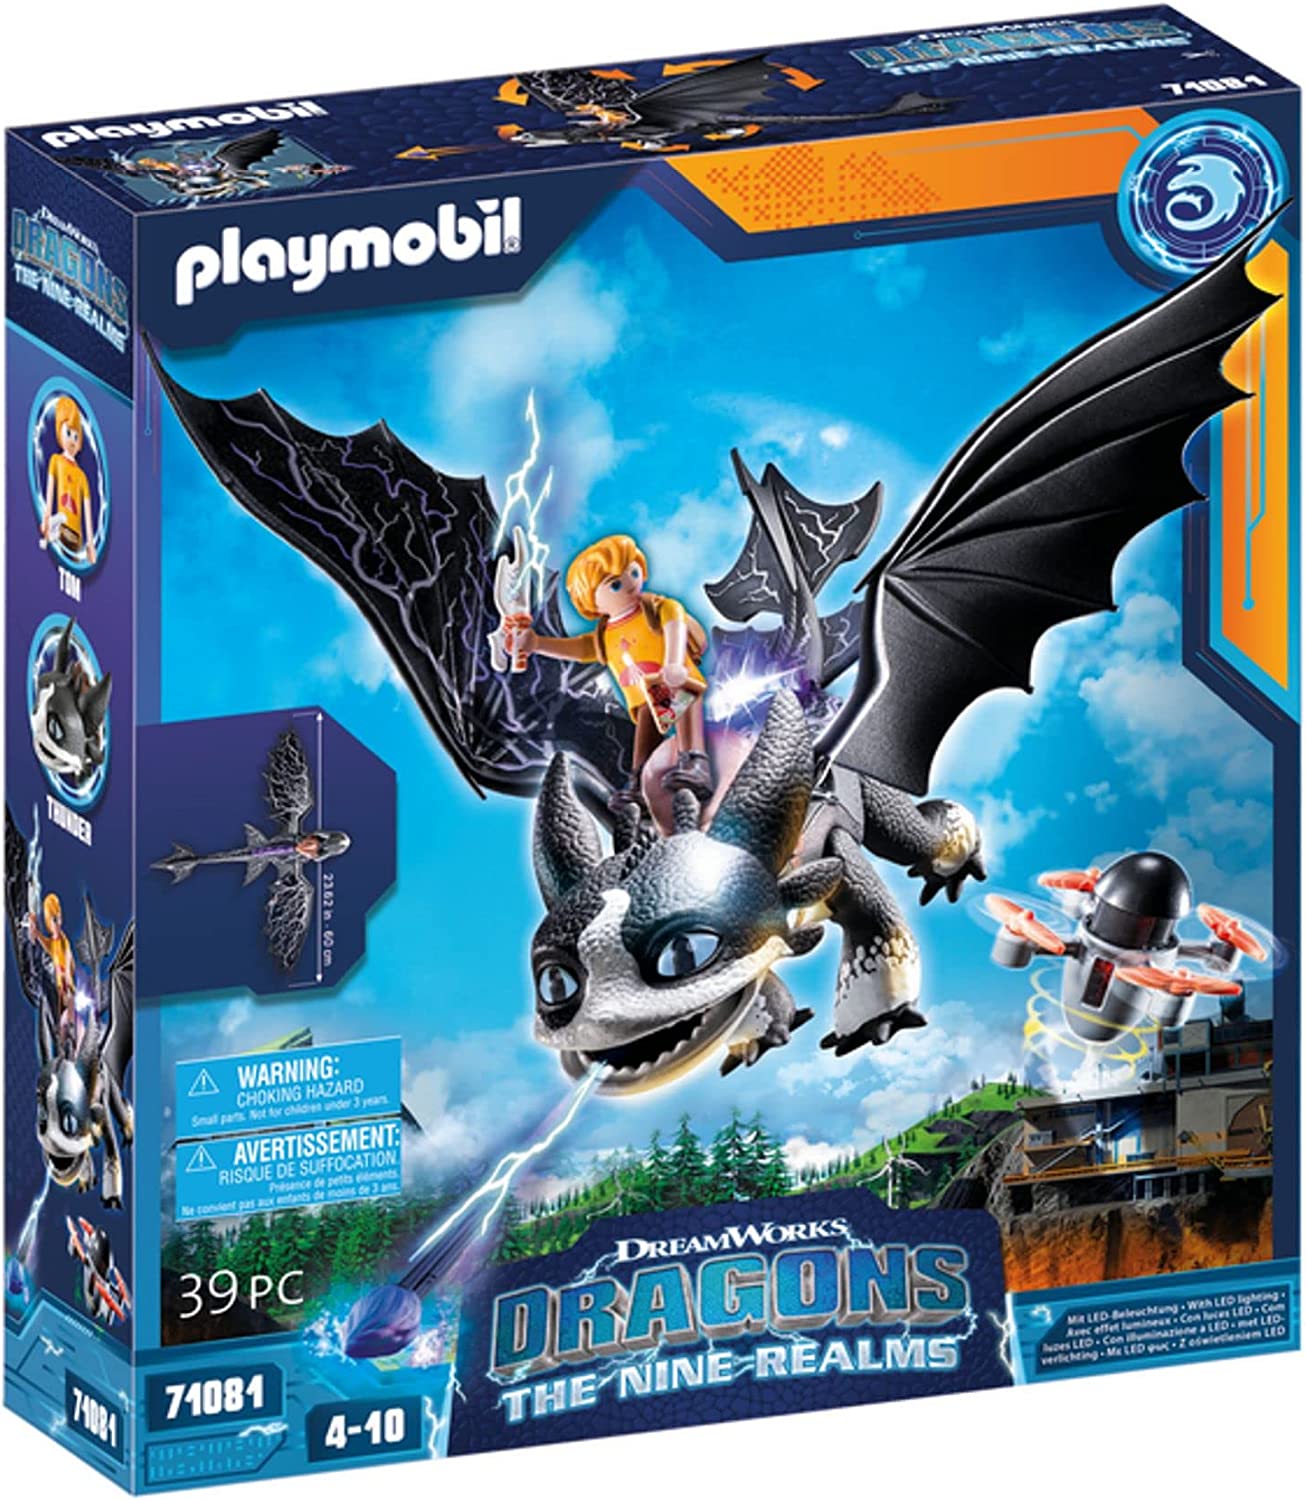 PLAYMOBIL DreamWorks Dragons 71081 Dragons: The Nine Realms - Thunder & Tom, Dragons Figure and Toy Dragon with Shooting Function and Light Module, Toy for Children from 4 Years